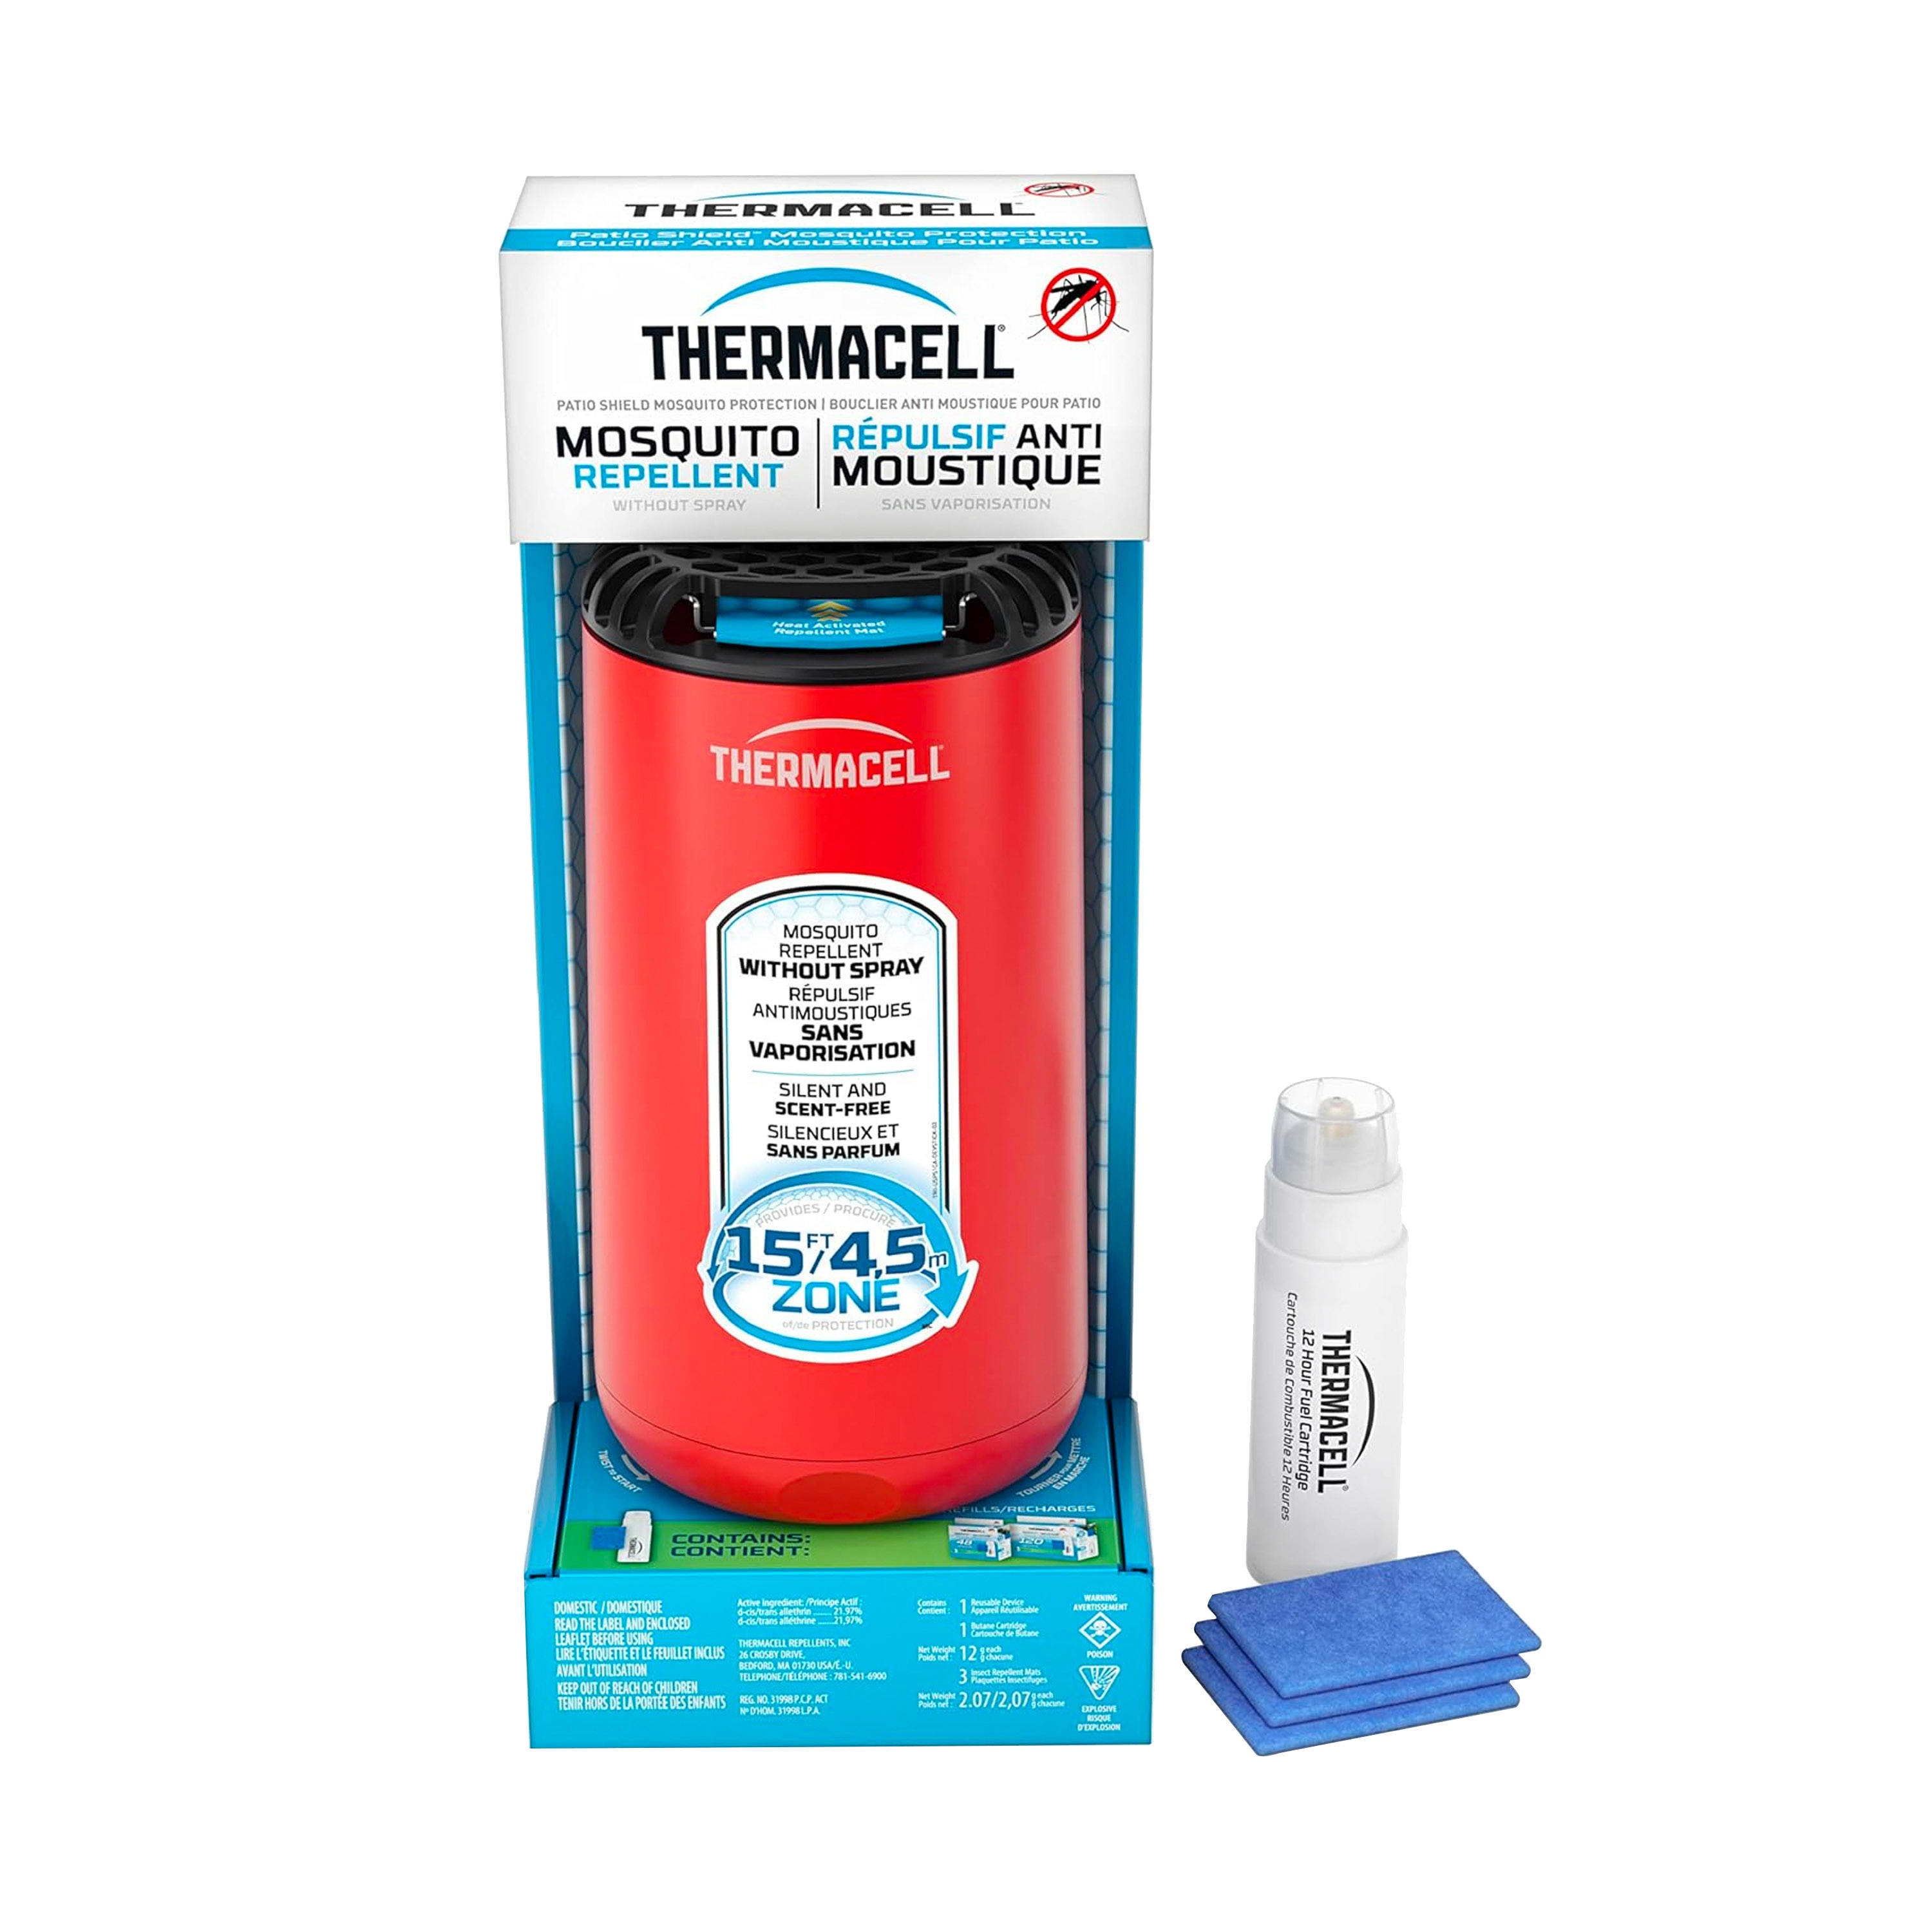 ThermaCELL® Patio Shield Mosquito Repellent